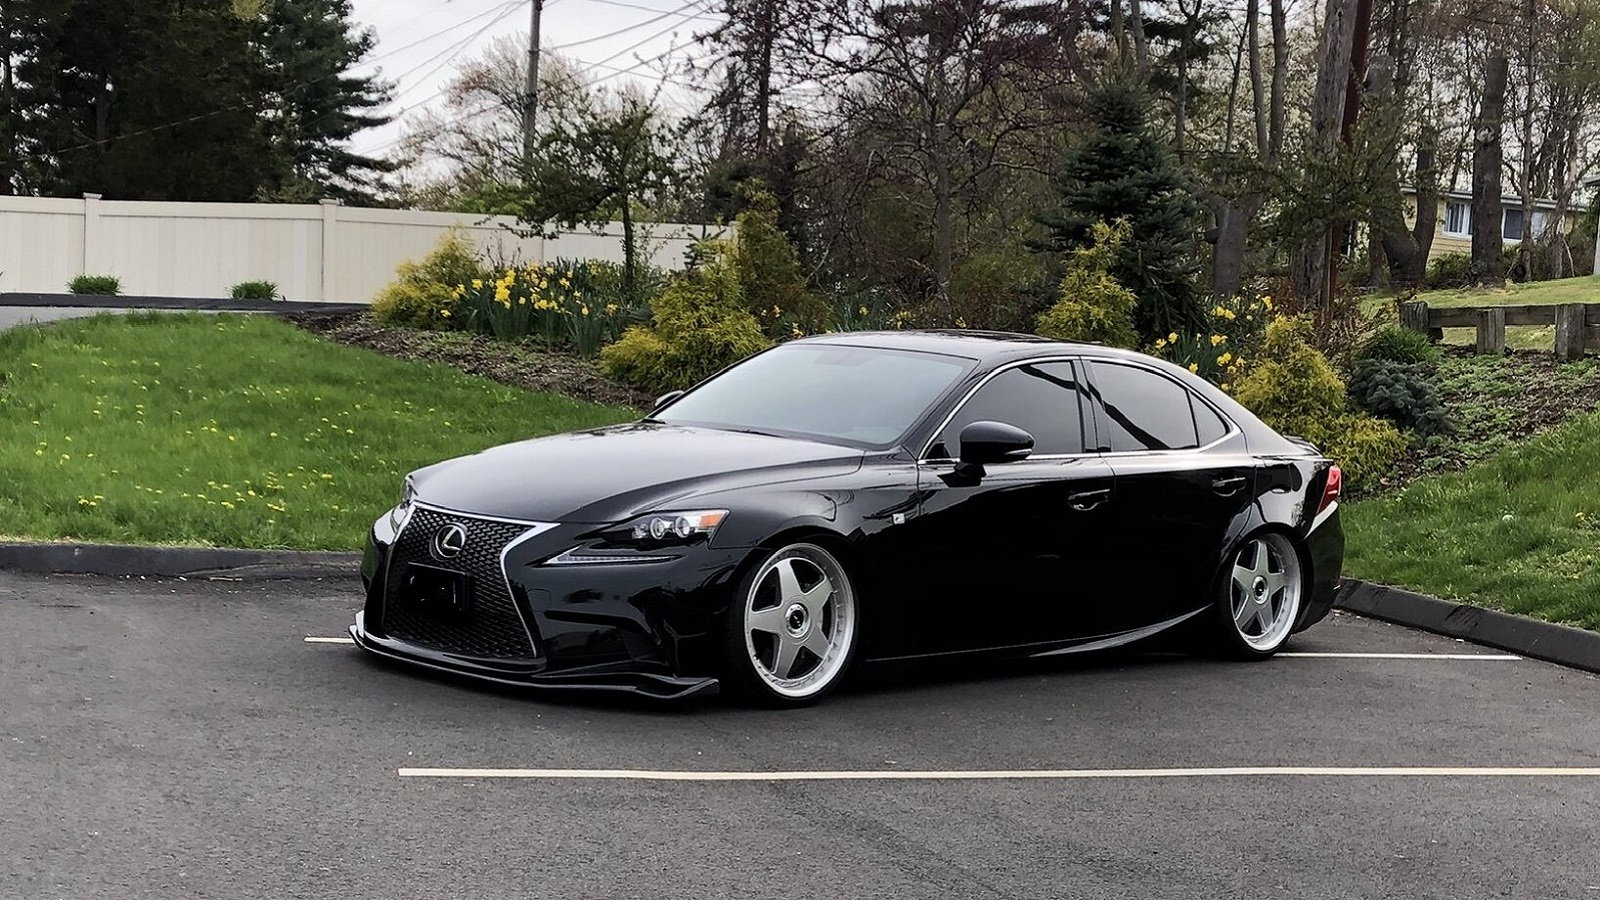 Bagged Lexus IS300 F Sport Is the Real VIP ClubLexus